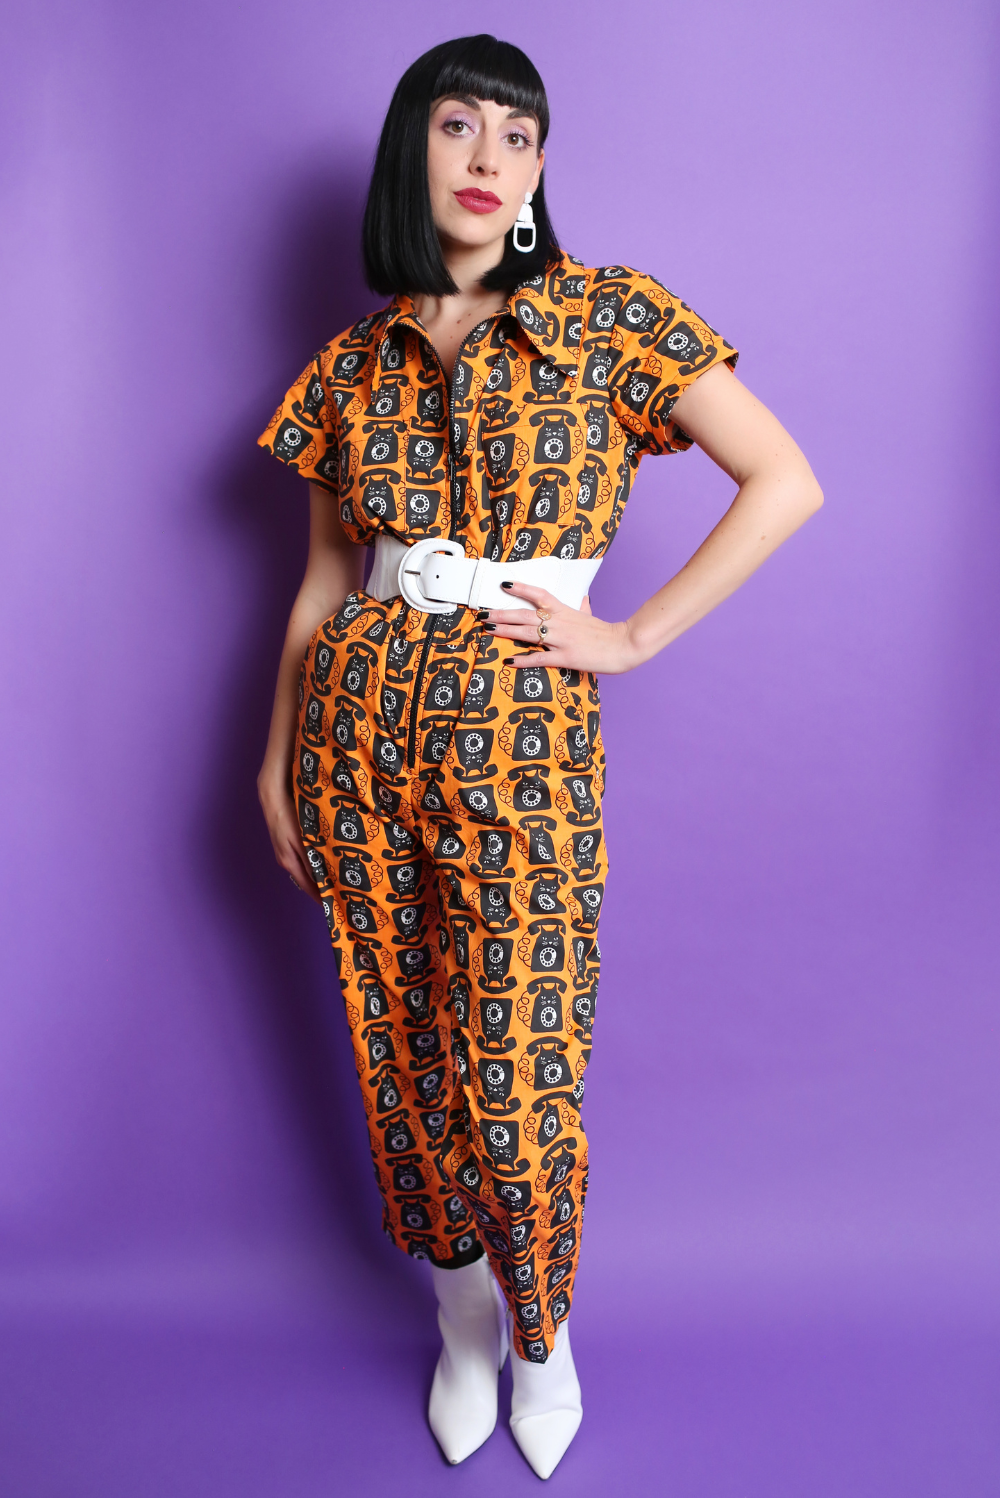 Black-haired model in orange and black cat phone print jumpsuit with white accessories